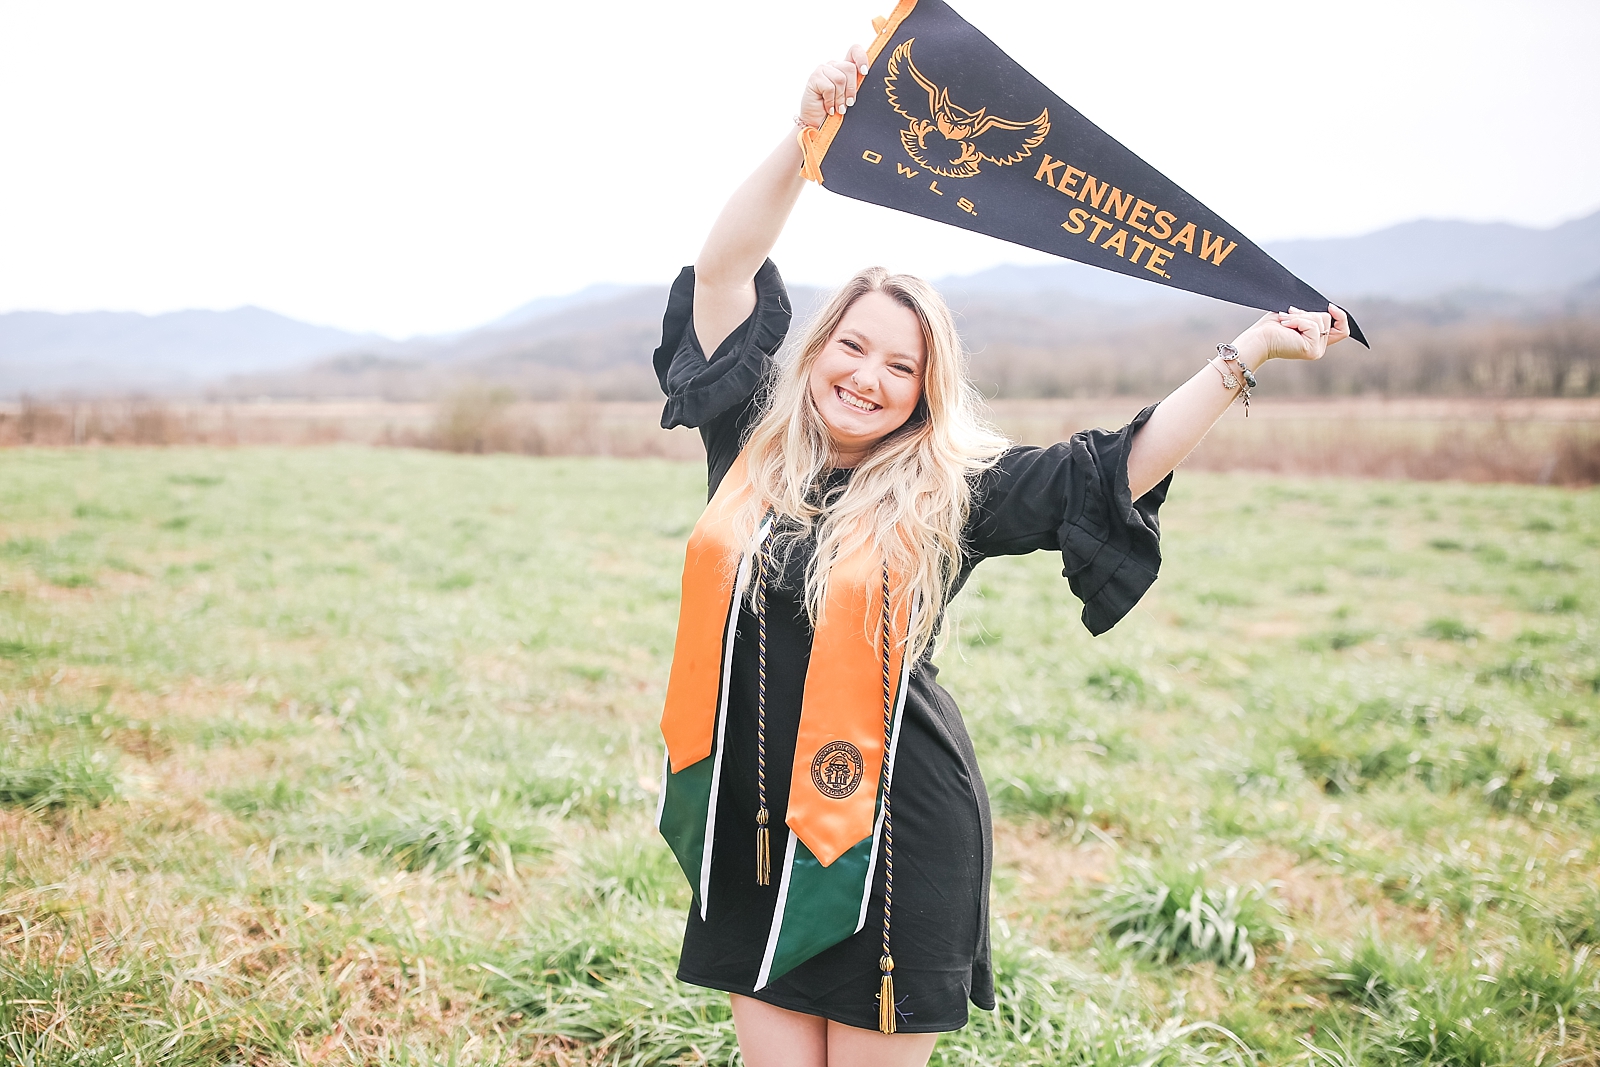 Kennesaw State University Senior Session Rachel holding pennant over head smiling at the camera photo